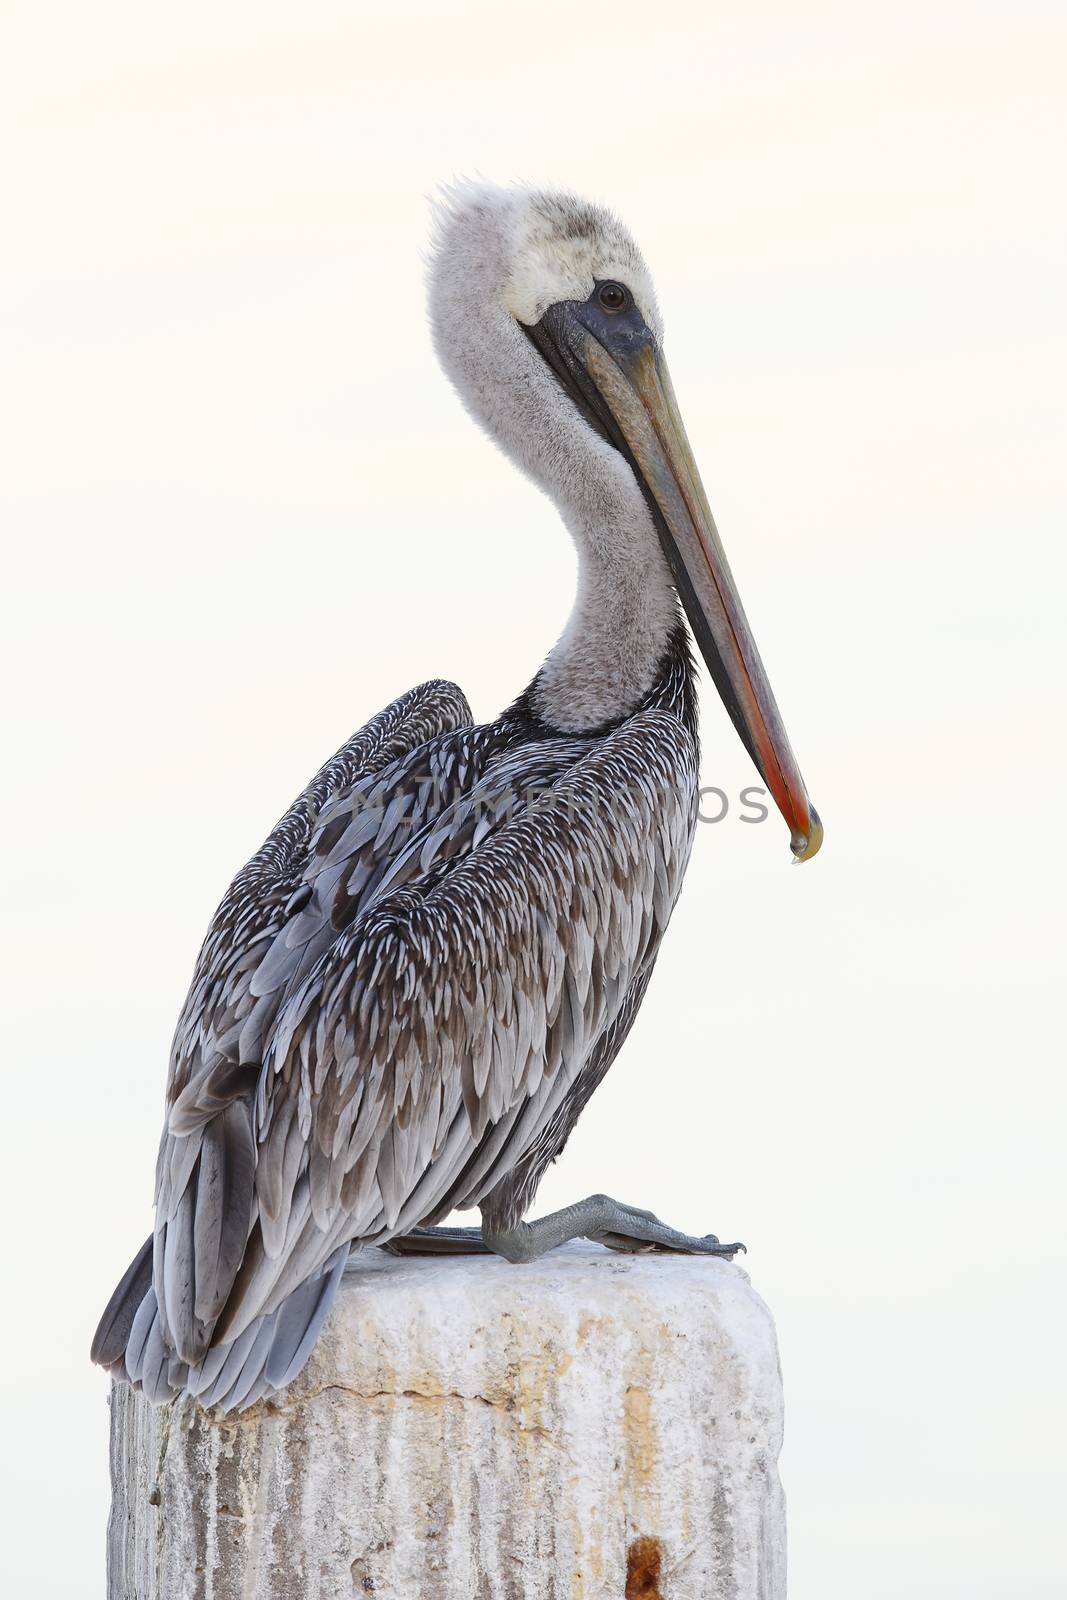 Immature Brown Pelican (Pelecanus occidentalis) perched on a dock piling in the Gulf of Mexico - Cedar Key, Florida